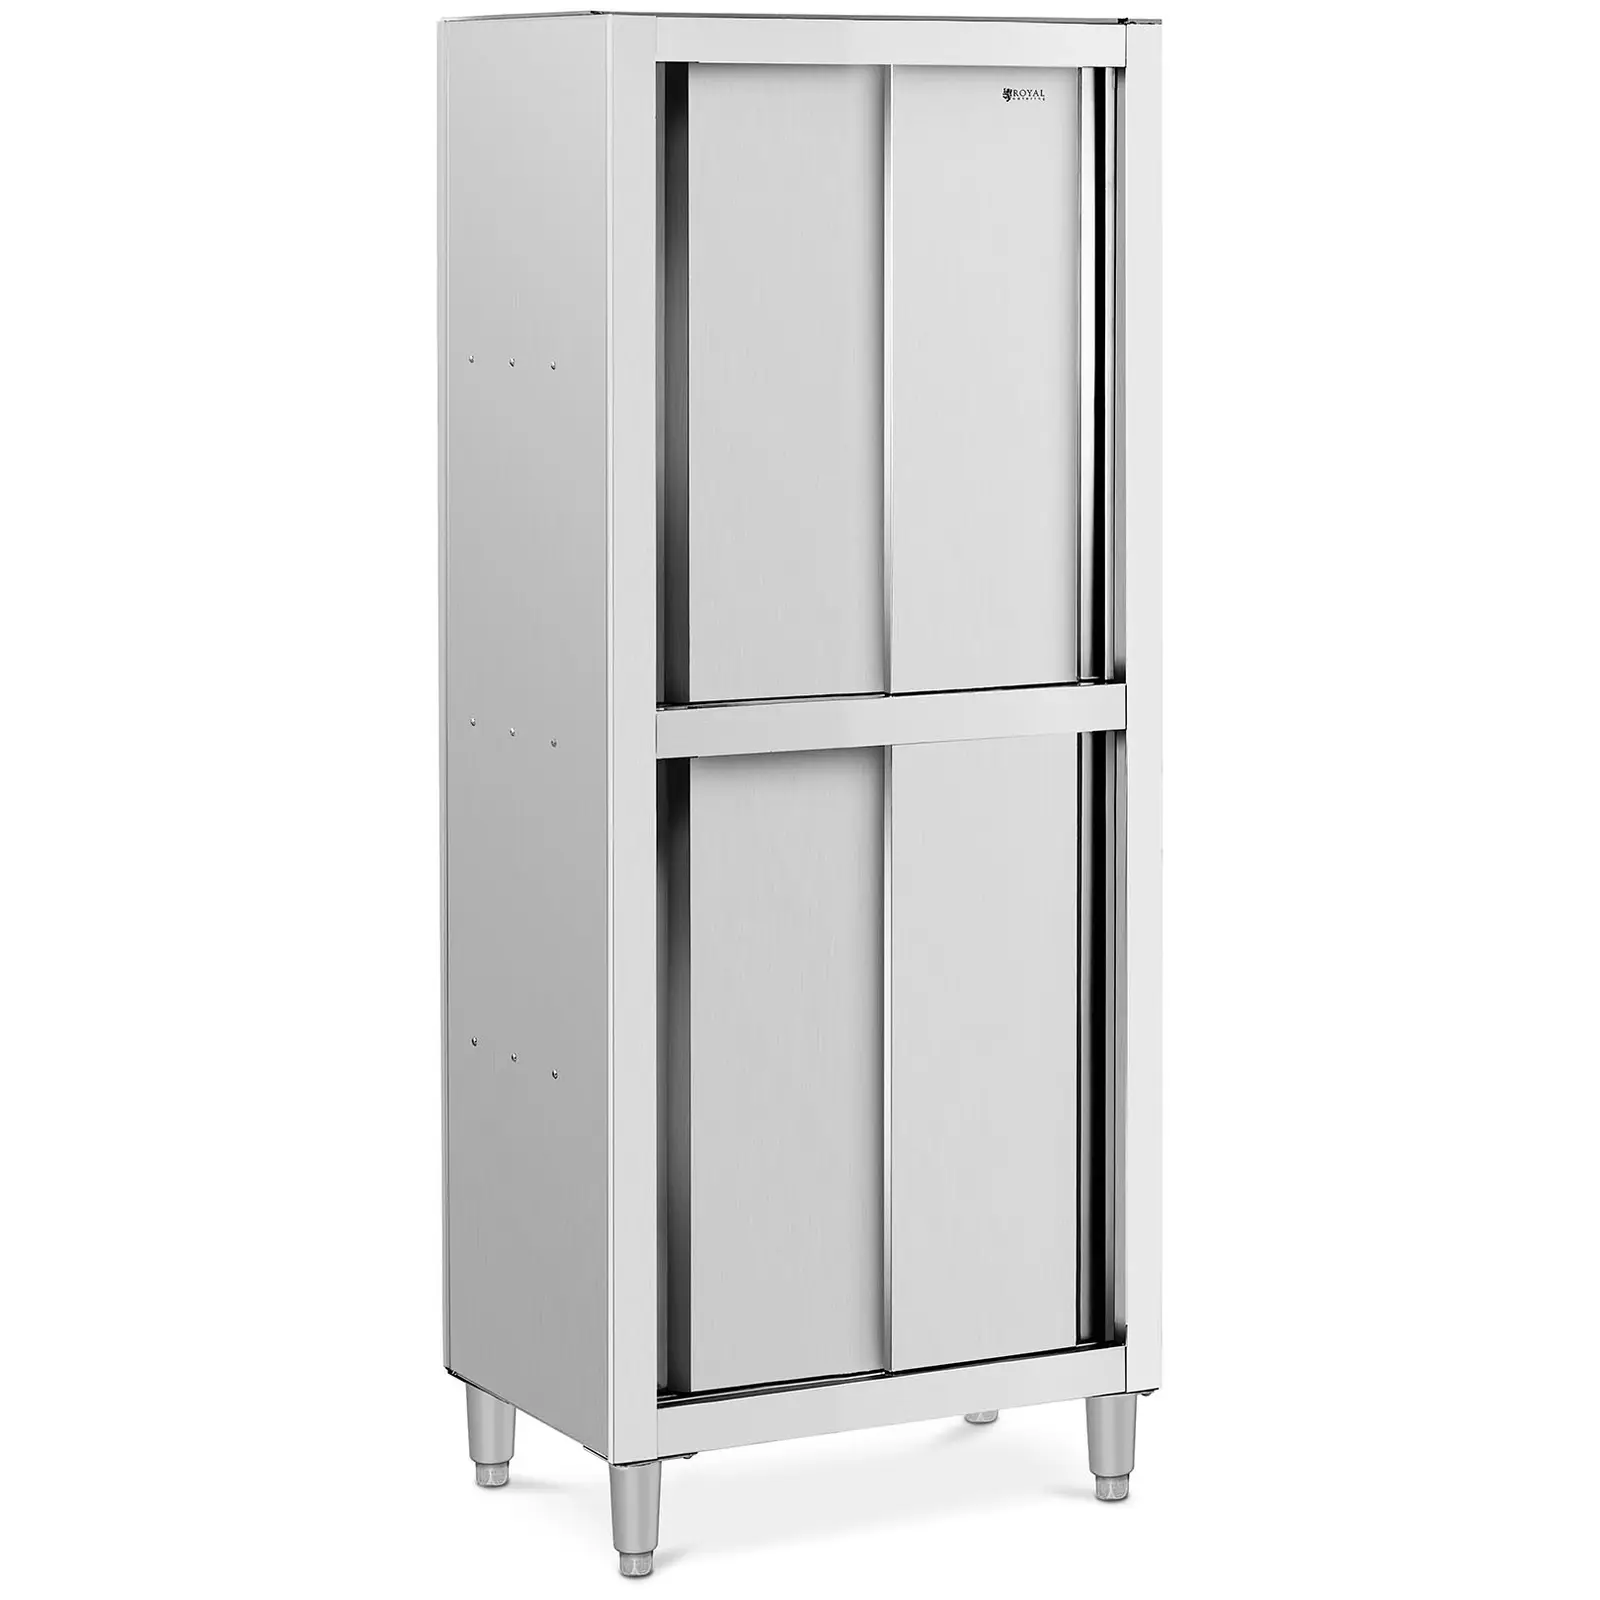 Stainless steel dish cupboard - 800 x 500 x 1800 mm - Royal Catering